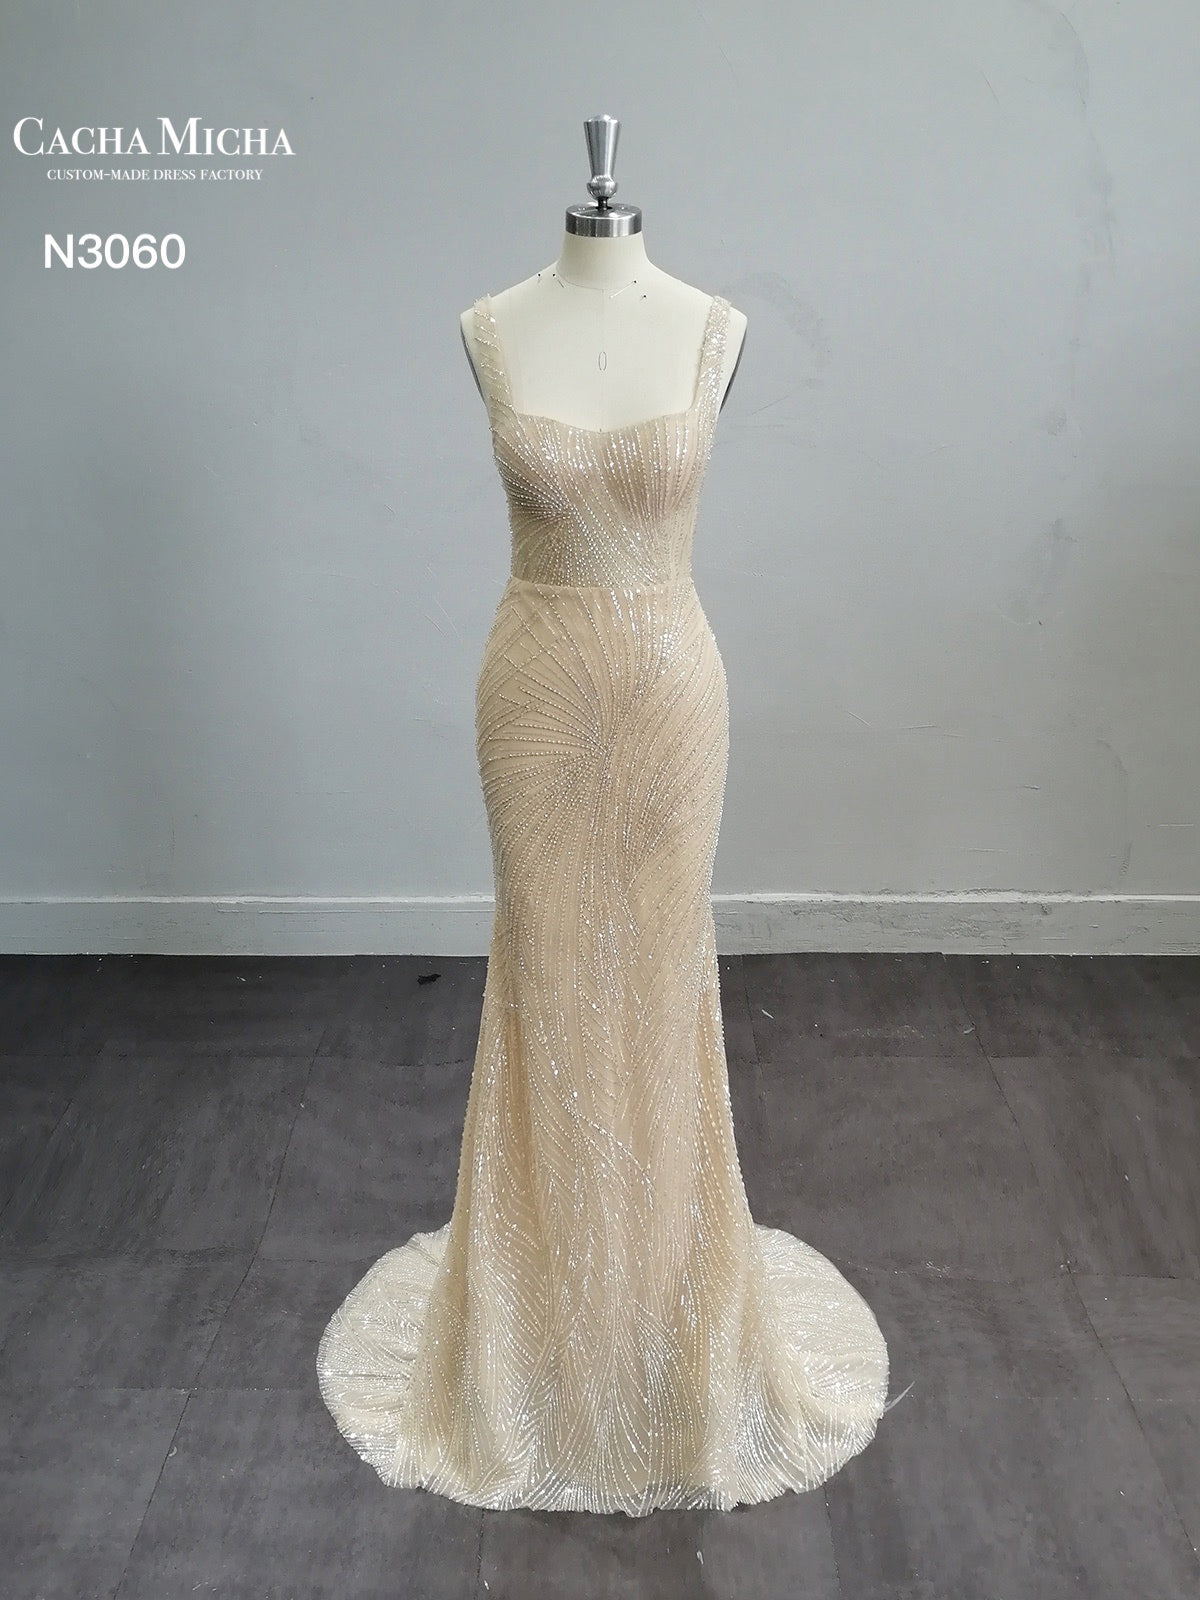 Stunning Heavy Beaded Lace Champagne Wedding Dress N3060